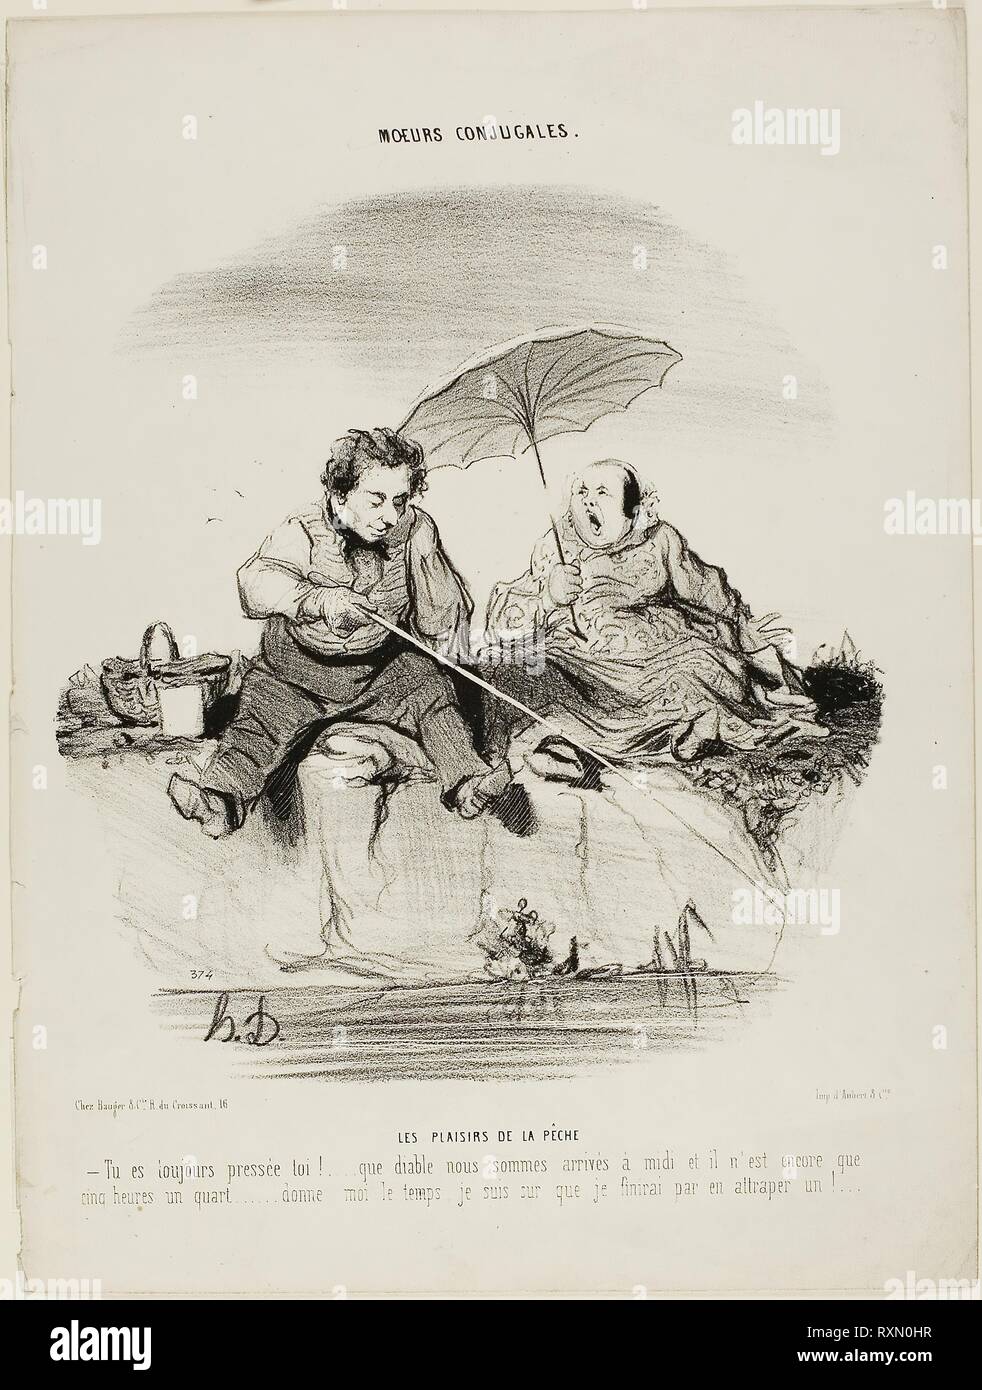 The Pleasures of Fishing. '- You are always in such a rush - Good God, we only just got here at noon and it is now only a quarter past five - Just give me a little more time, I am sure I'll end by catching one,' plate 50 from Moeurs Conjugales. Honoré Victorin Daumier; French, 1808-1879. Date: 1842. Dimensions: 241 × 224 mm (image); 343 × 259 mm (sheet). Lithograph in black on white wove paper. Origin: France. Museum: The Chicago Art Institute. Author: Honoré-Victorin Daumier. Stock Photo